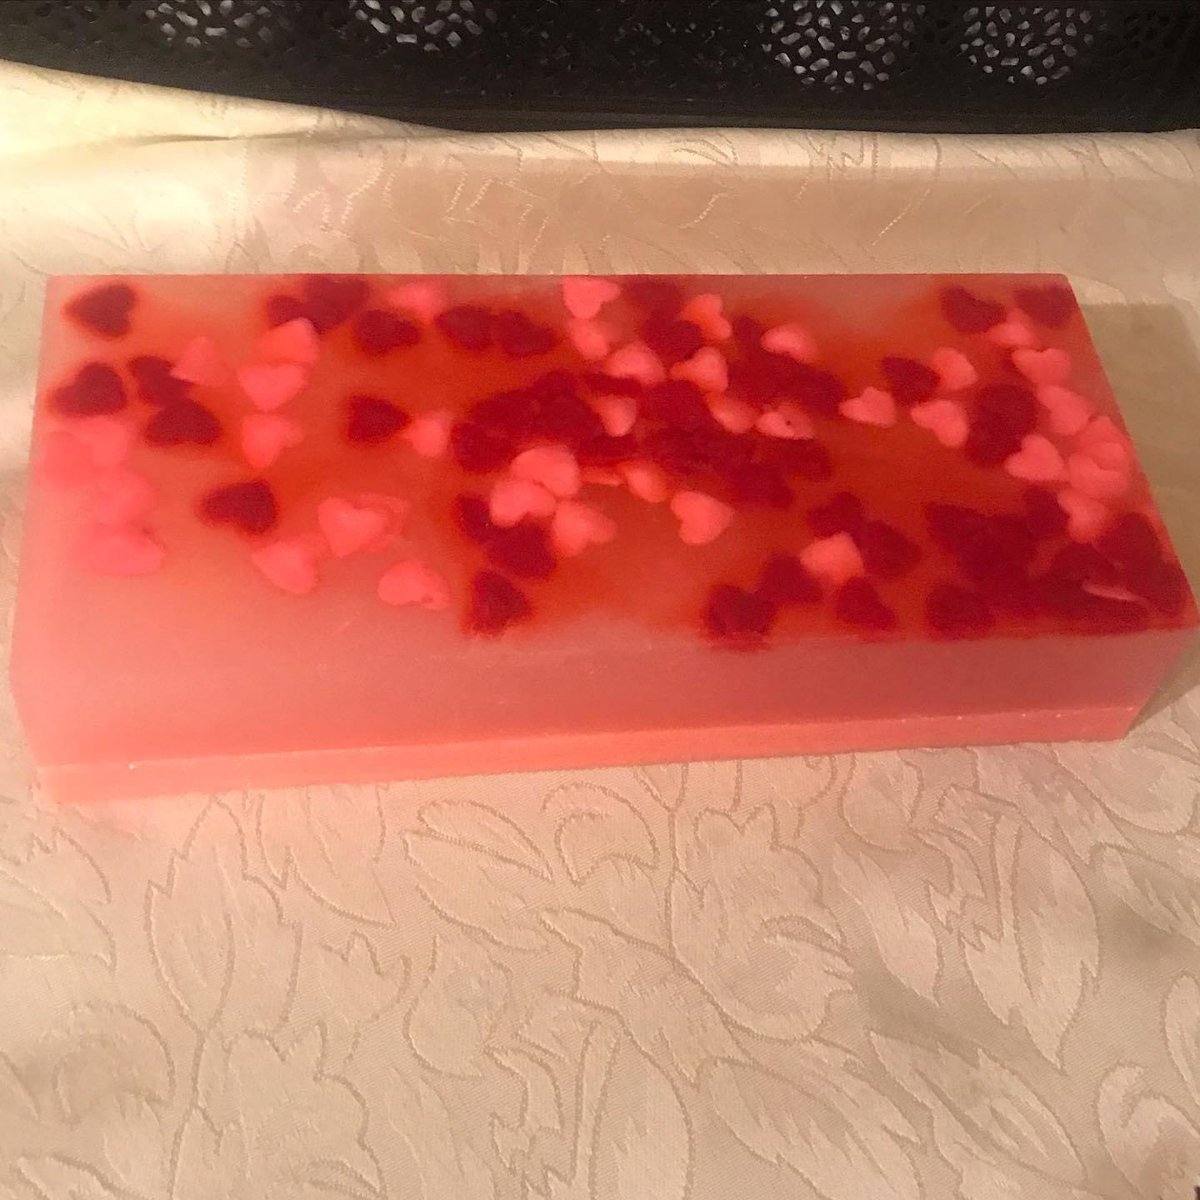 Lick 👅 me all over Victoria Secret type organic palm free handmade real guava based luxury soap cakes #summerrainesnaturals💜💜💜💜 #summerrainesnaturals#lickmeallover #victoriassecret #guava #fruitsoap #bestskincareproducts